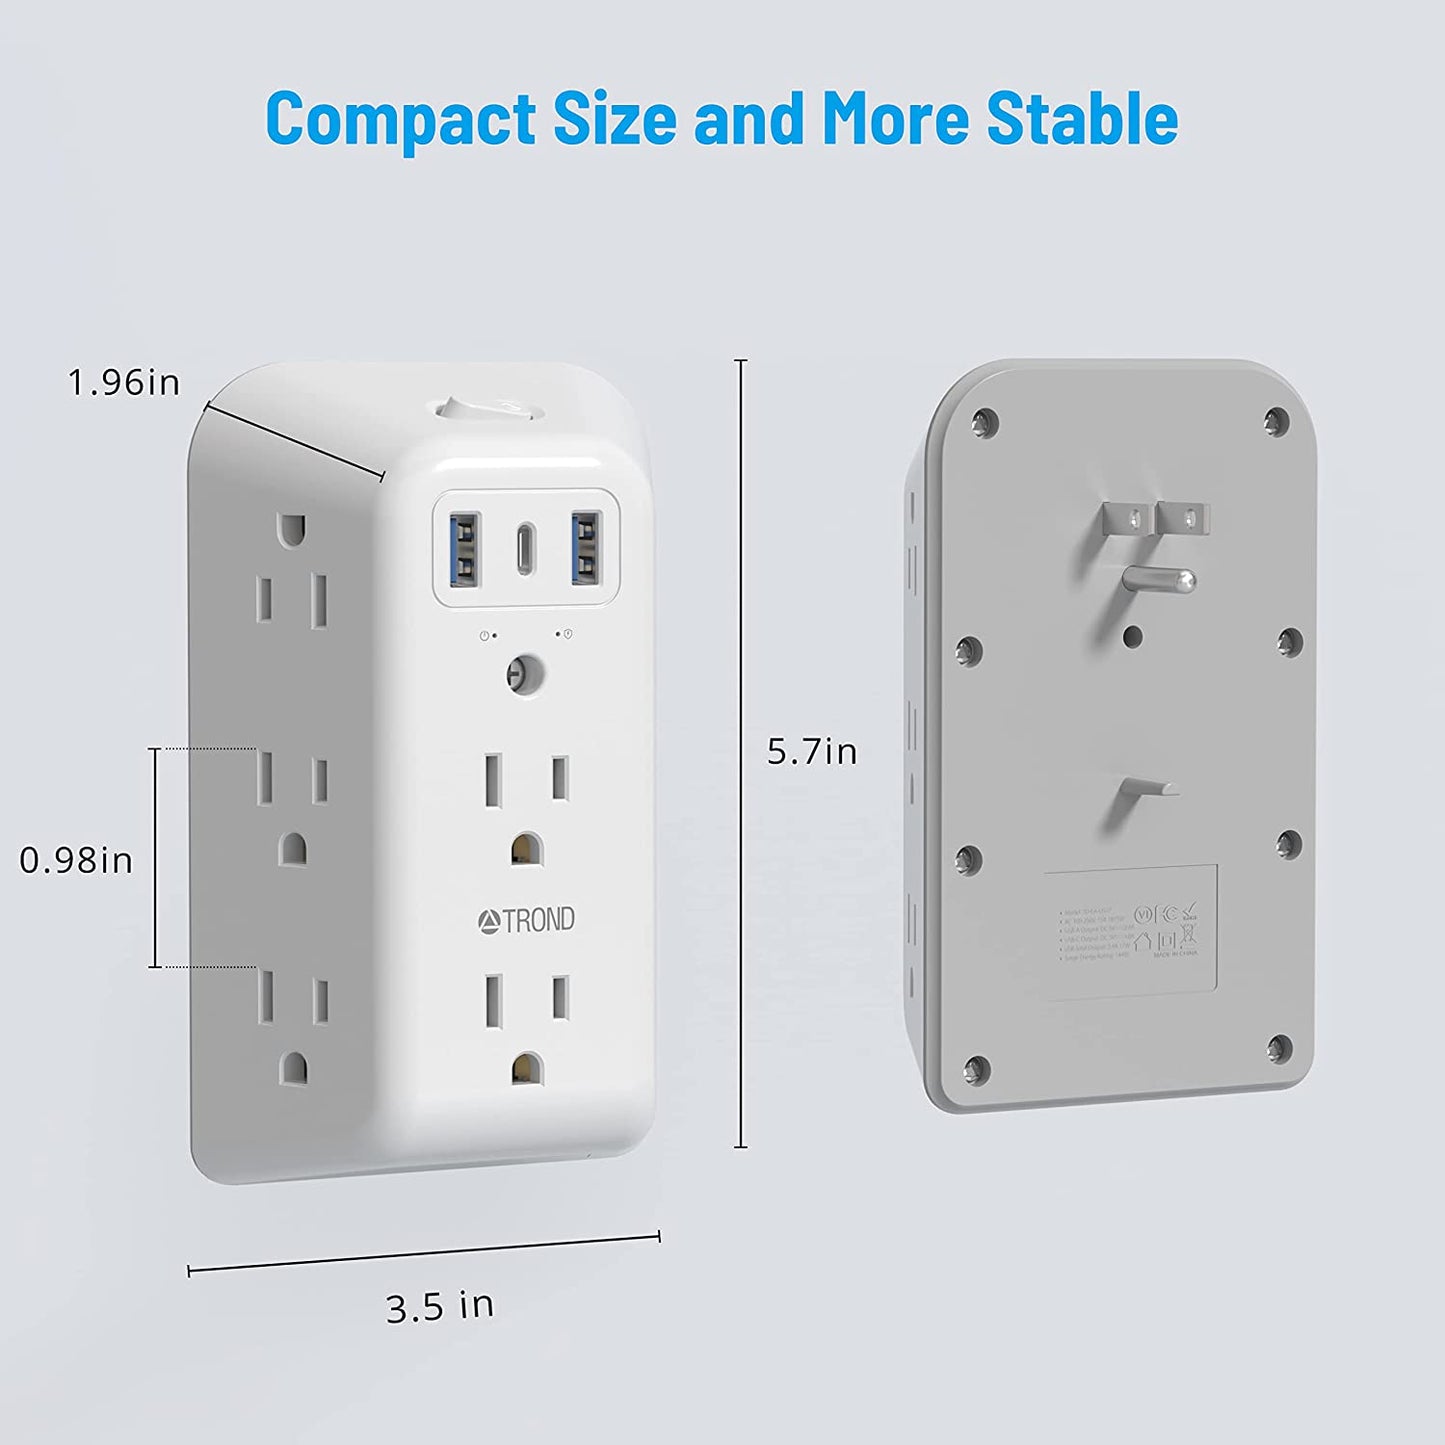 USB Wall Charger, Surge Protector, TROND 5 Outlet Extender with 3 USB Charging Ports (1 USB C) 3 Sided 1440J Multi Plug Outlets, Wall Mount Power Strip for Home Travel Office（ON/Off Switch）